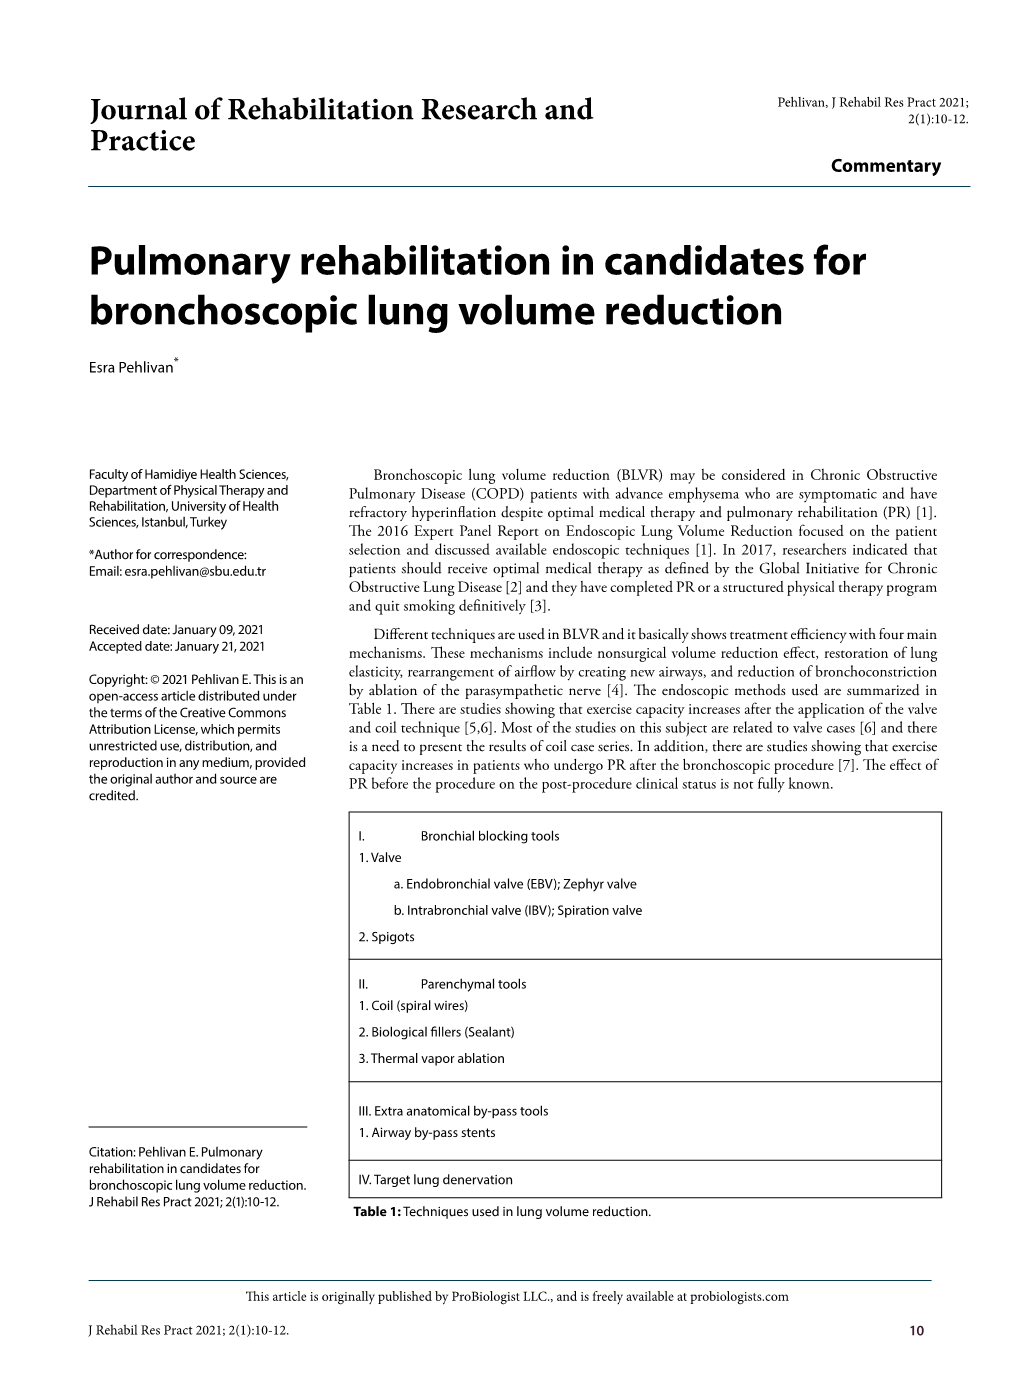 Pulmonary Rehabilitation in Candidates for Bronchoscopic Lung Volume Reduction